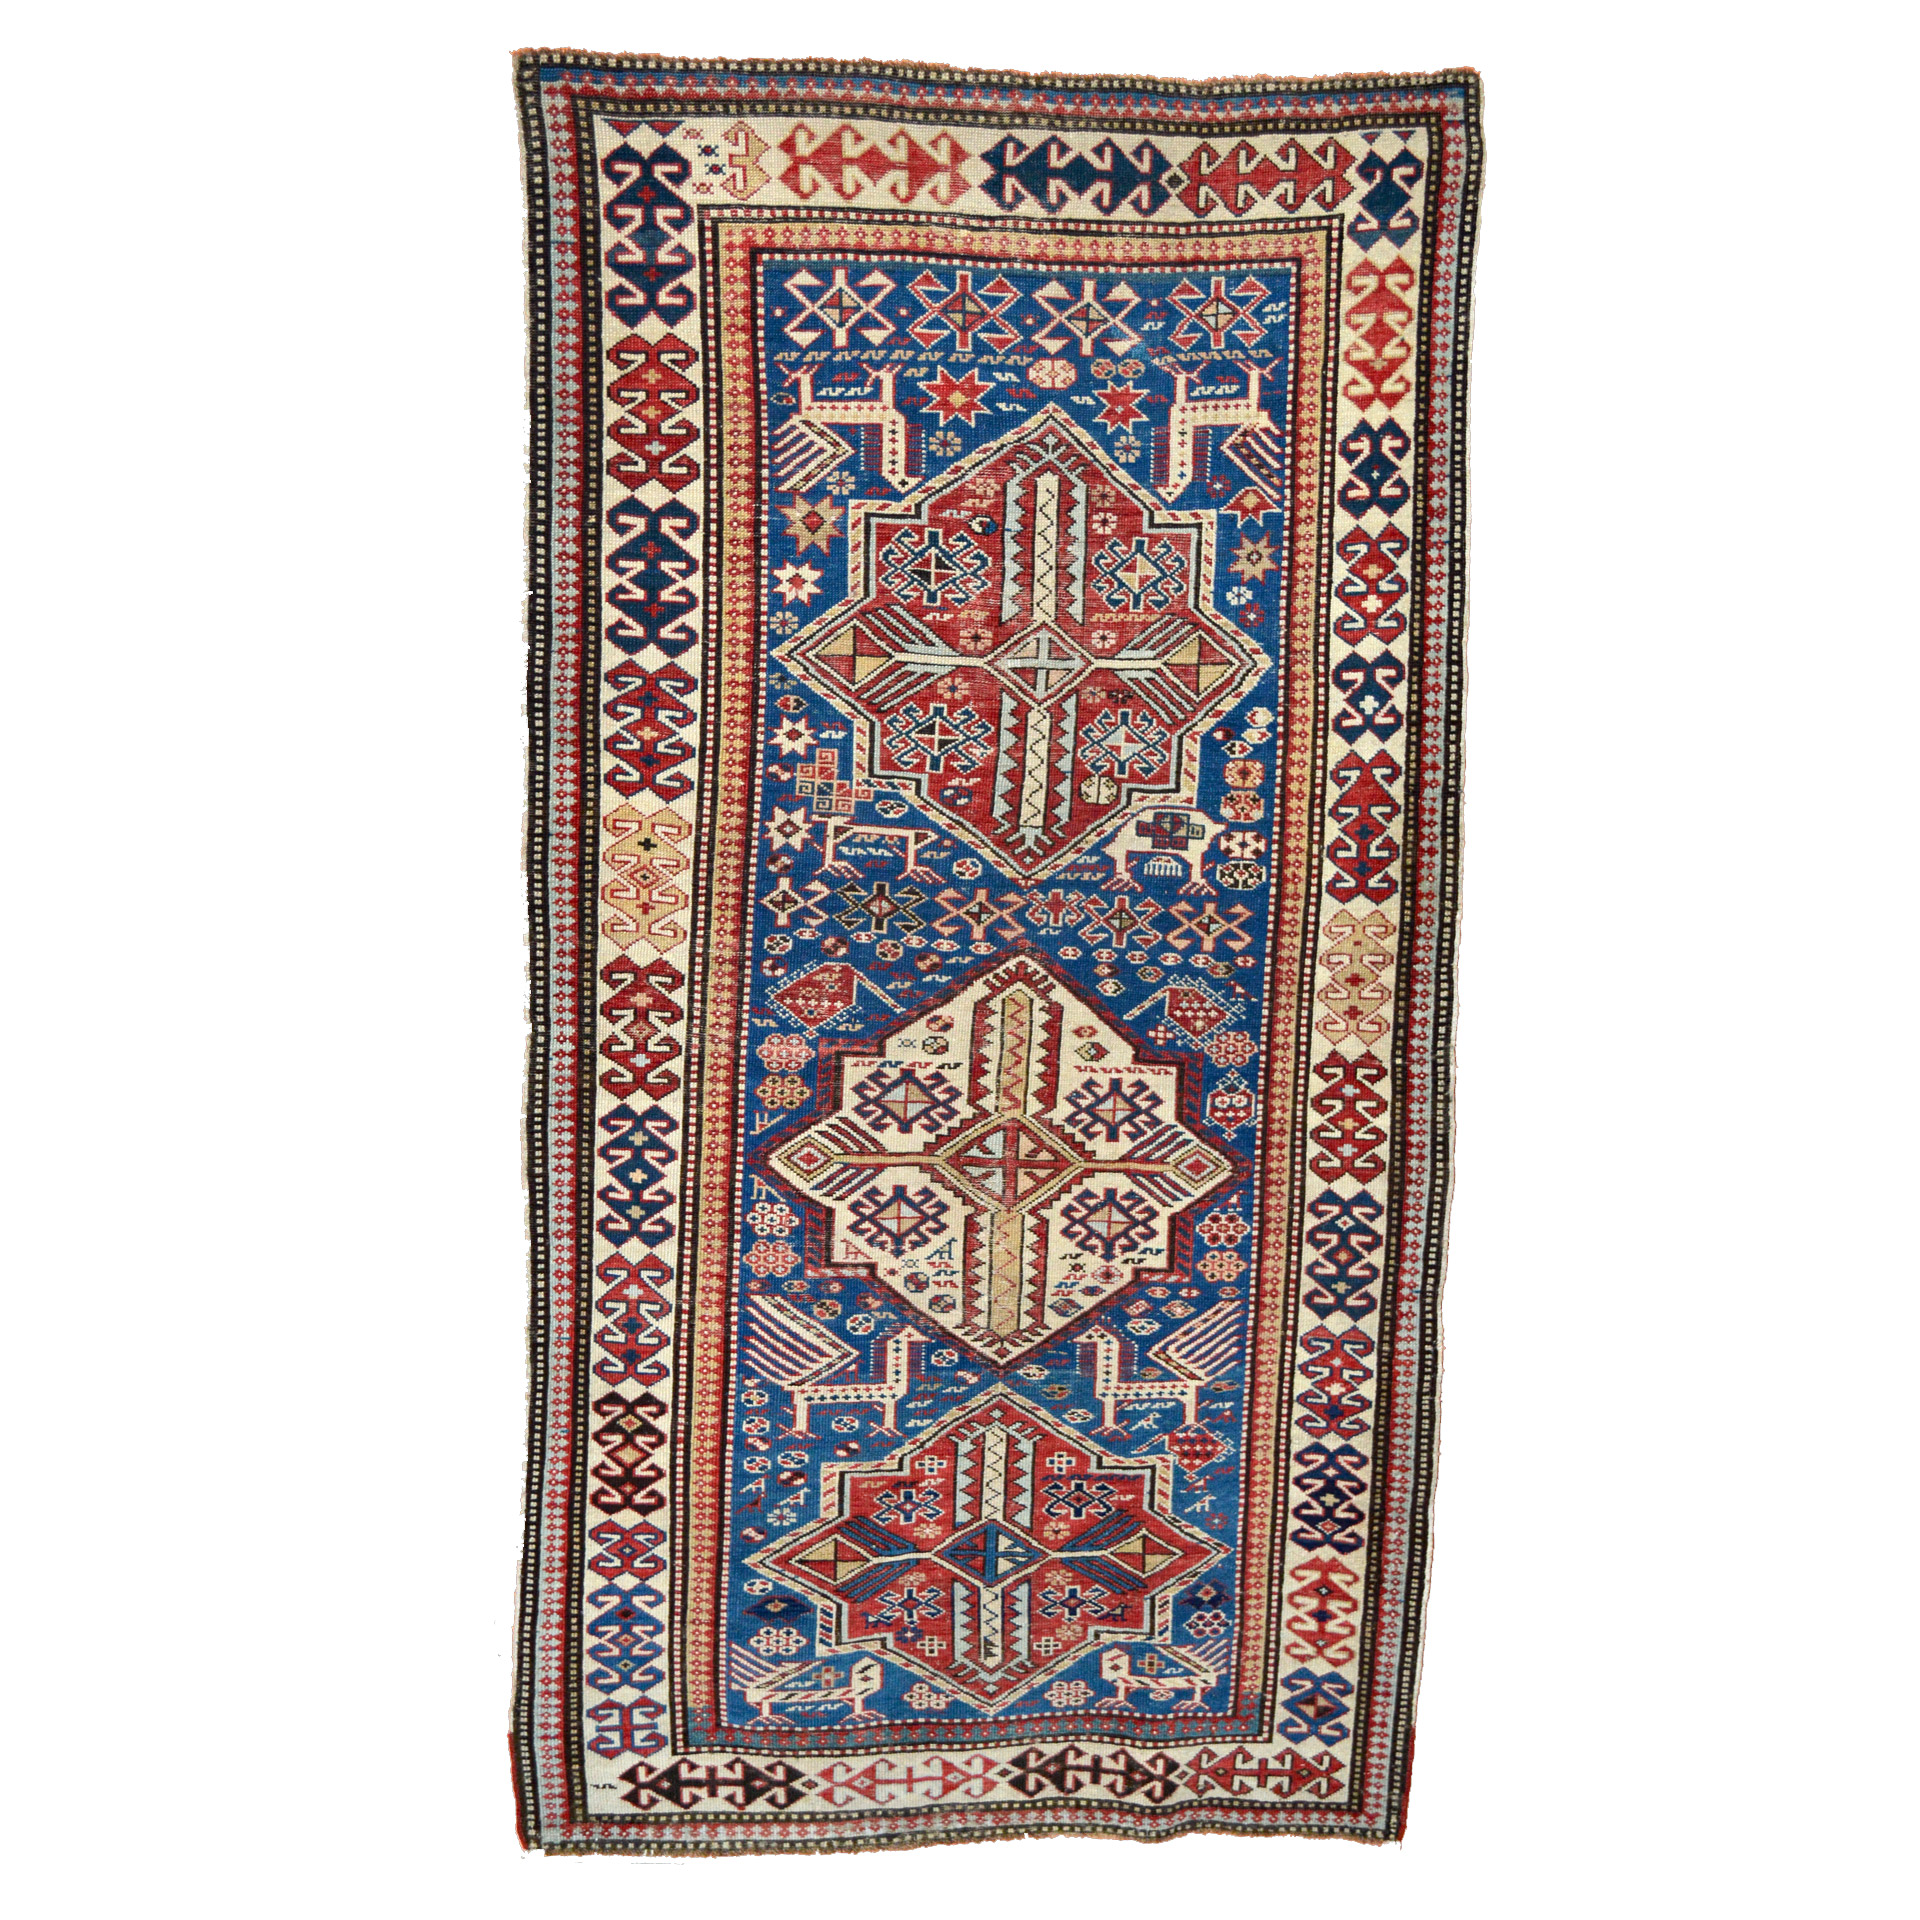 An antique Akstafa rug from the northeast Caucasus with an uncommon denim blue field - Douglas Stock Gallery, antique Oriental rugs Boston,MA area